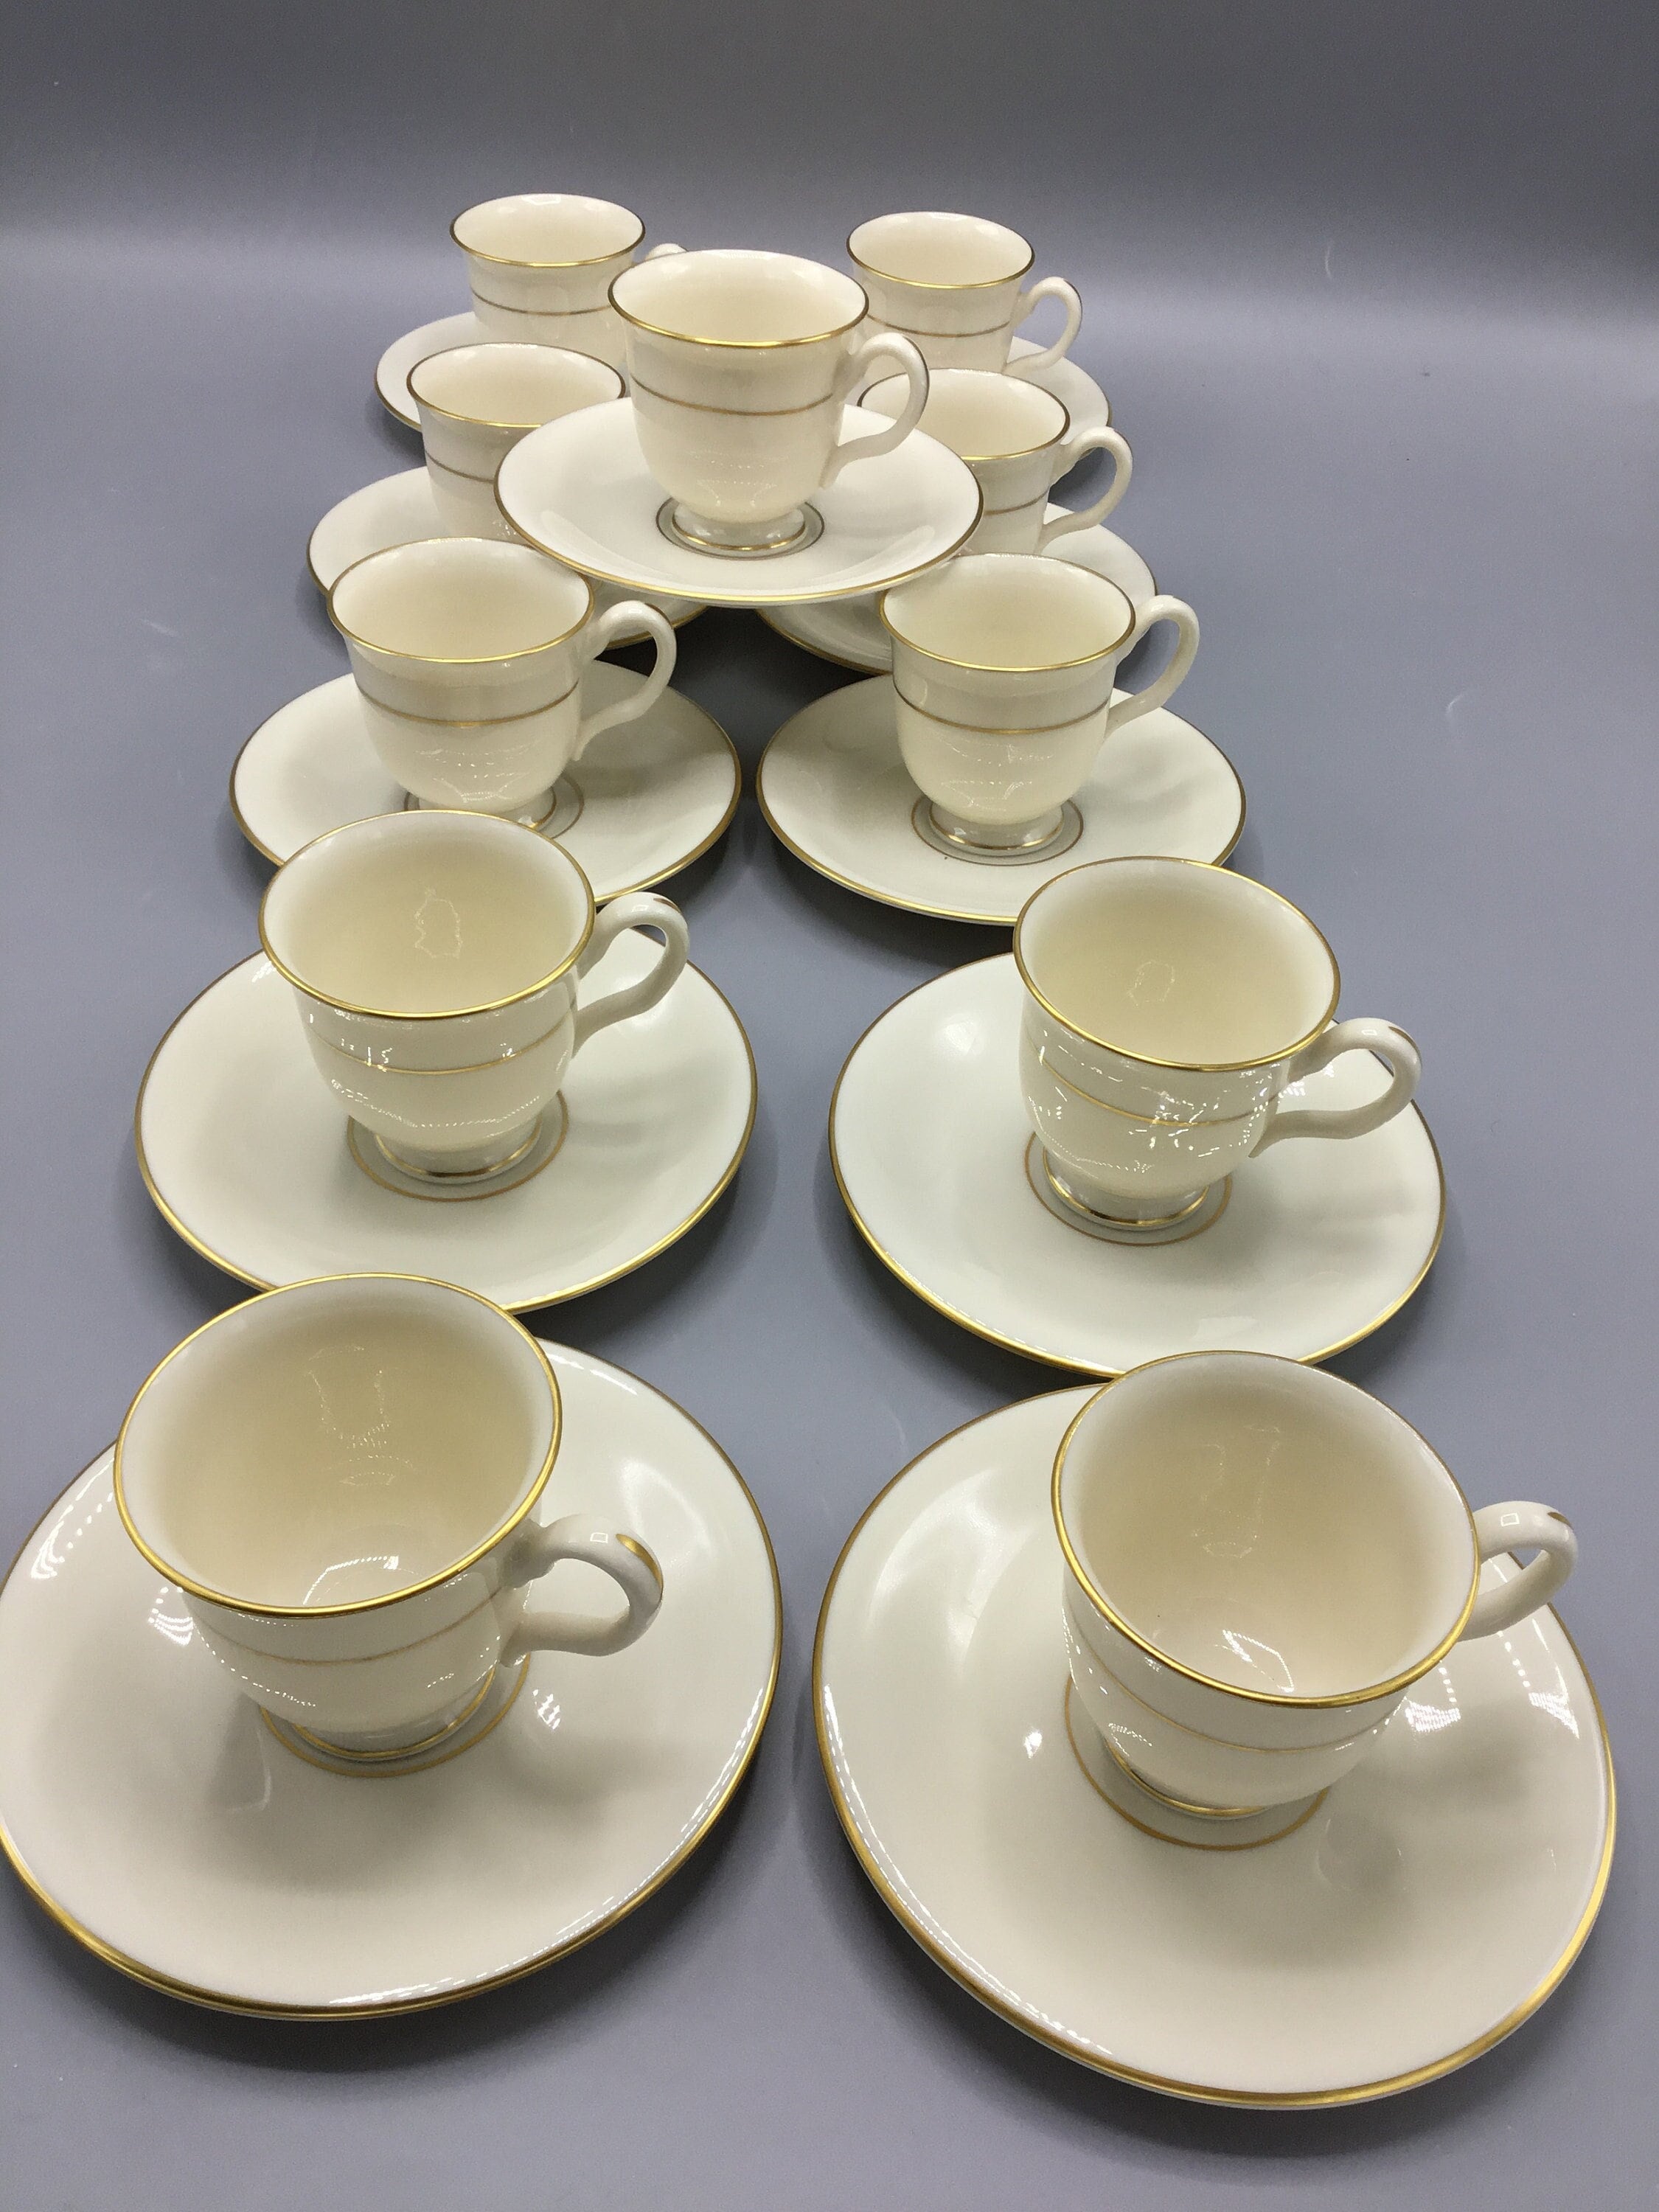 30 Tapered Personalized Espresso Cup Favors 3.5 Oz. I.T.I. Dover